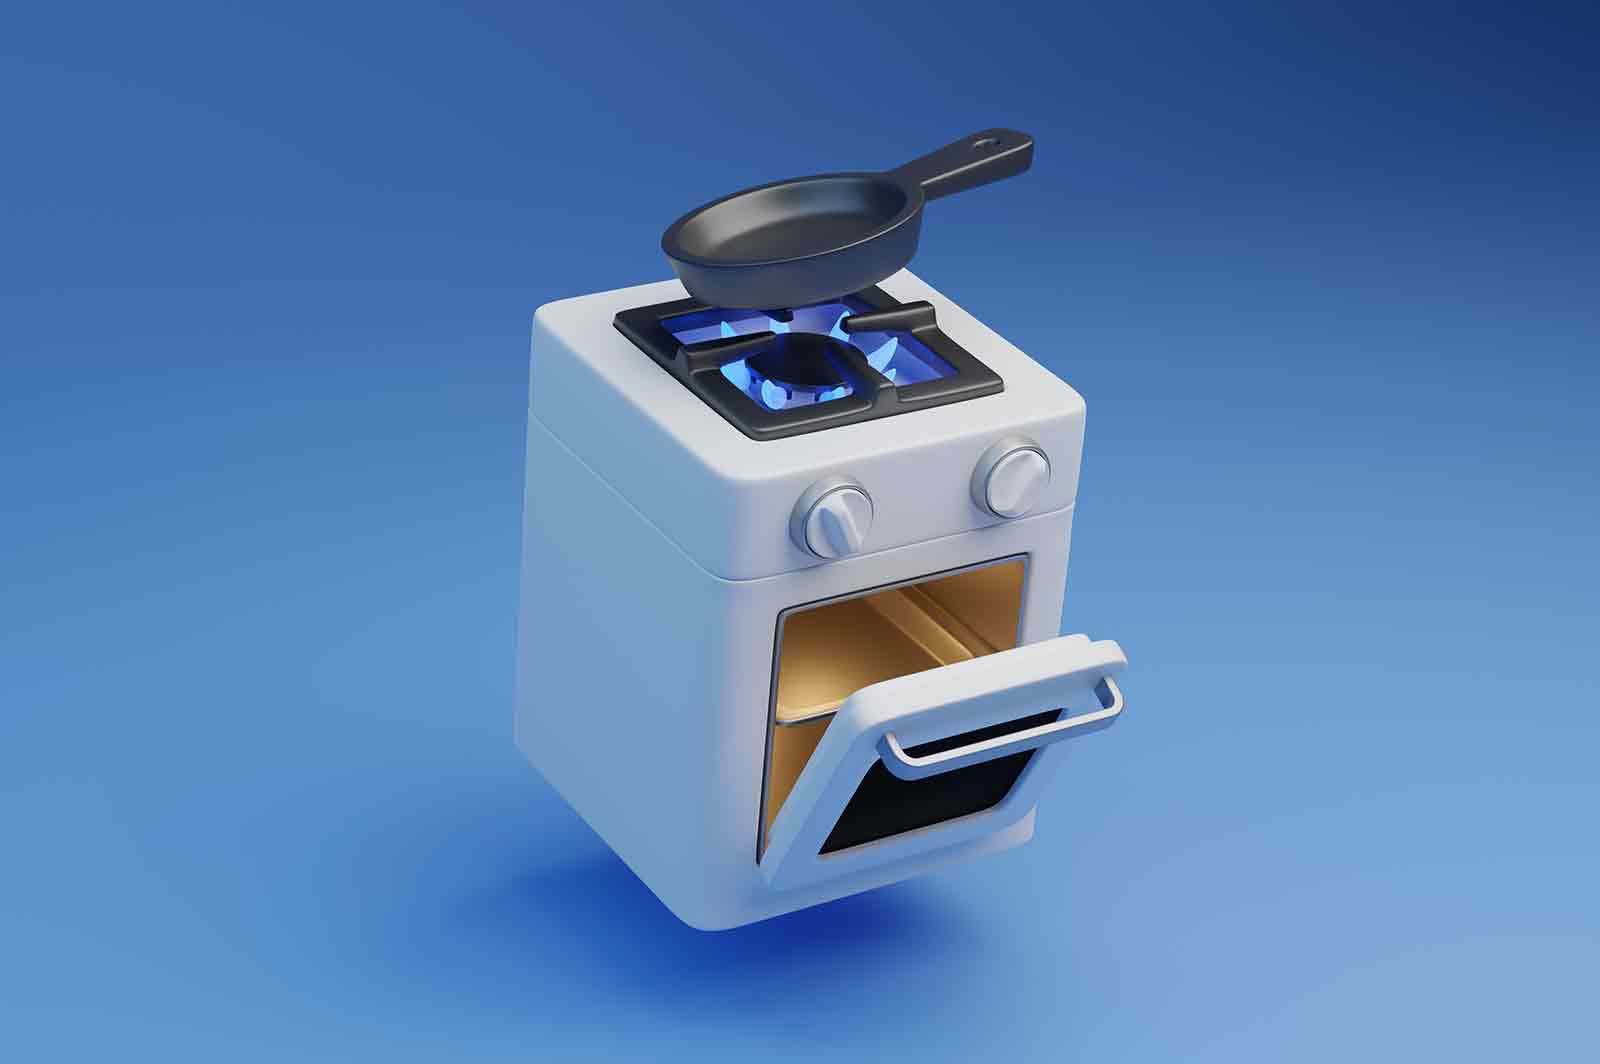 Modern gas stove with blue flame 3d rendered illustration. Stove with open oven. Kitchen equipment or appliance for cooking food